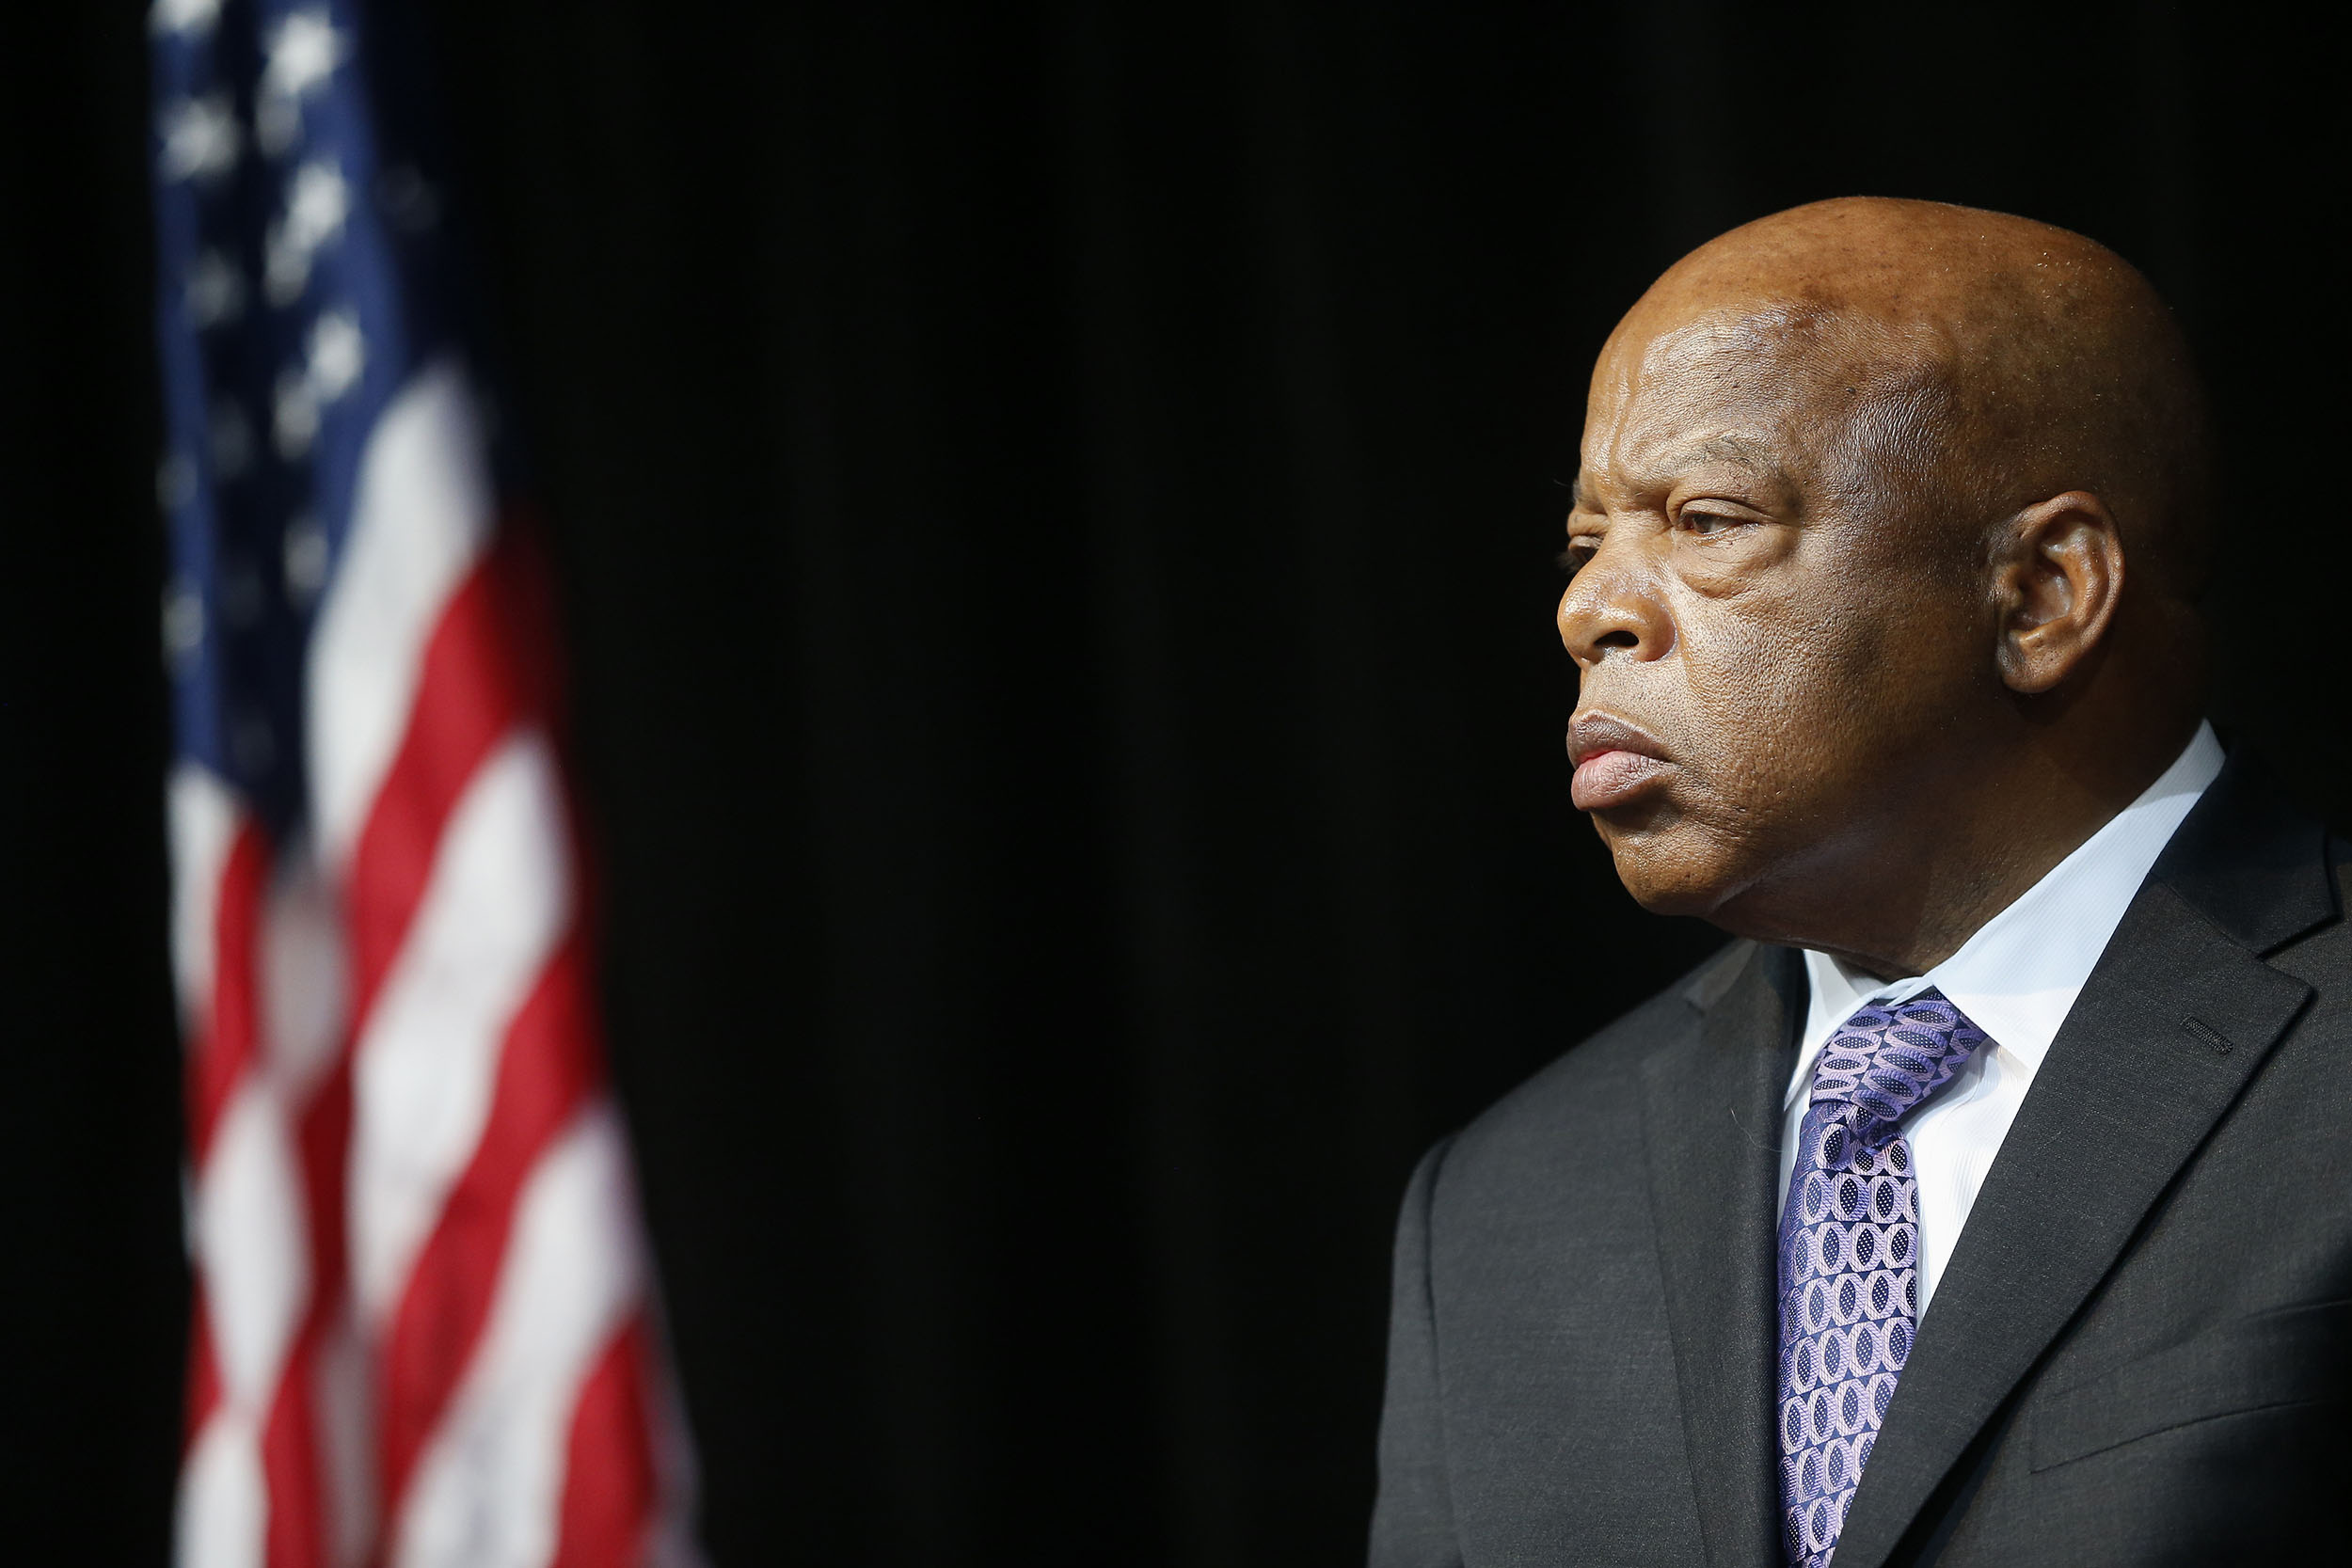 Civil rights activist and Rep. John Lewis, D-Ga. is introduced before speaking at the unveiling of a U.S. Postal Service stamp commemorating the 50th anniversary of the March on Washington, on Friday, August 23, 2013, in Washington, DC. 